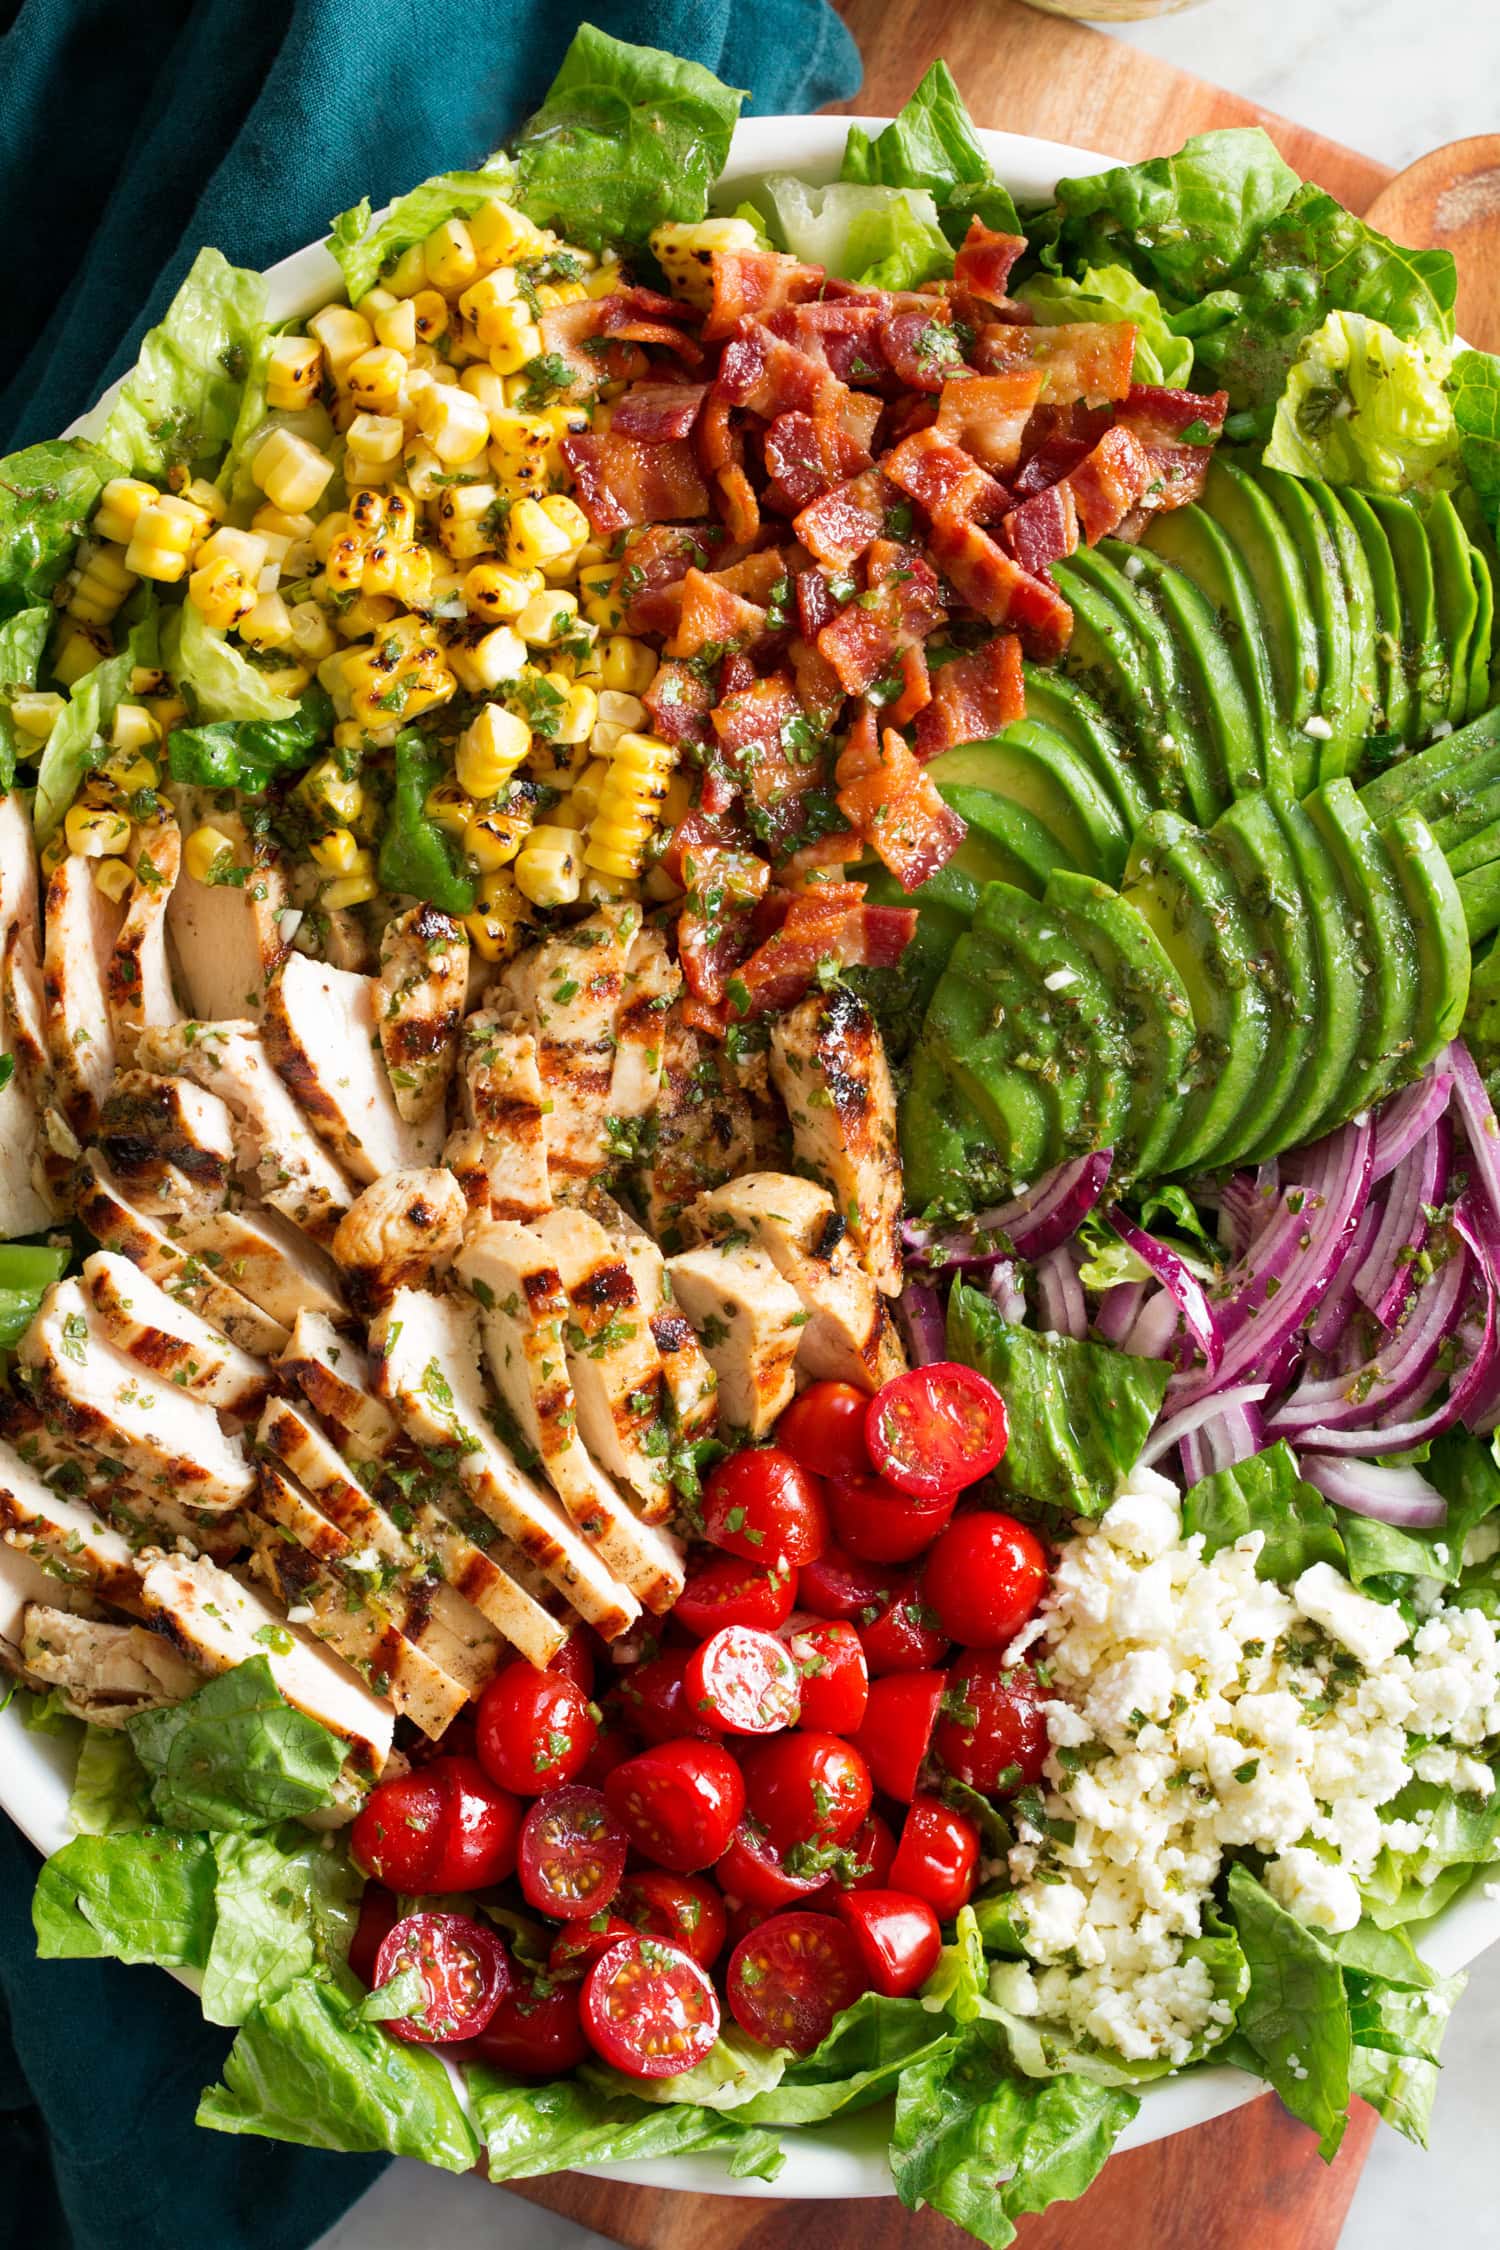 Close up photo of grilled chicken salad showing various ingredient textures and colors.